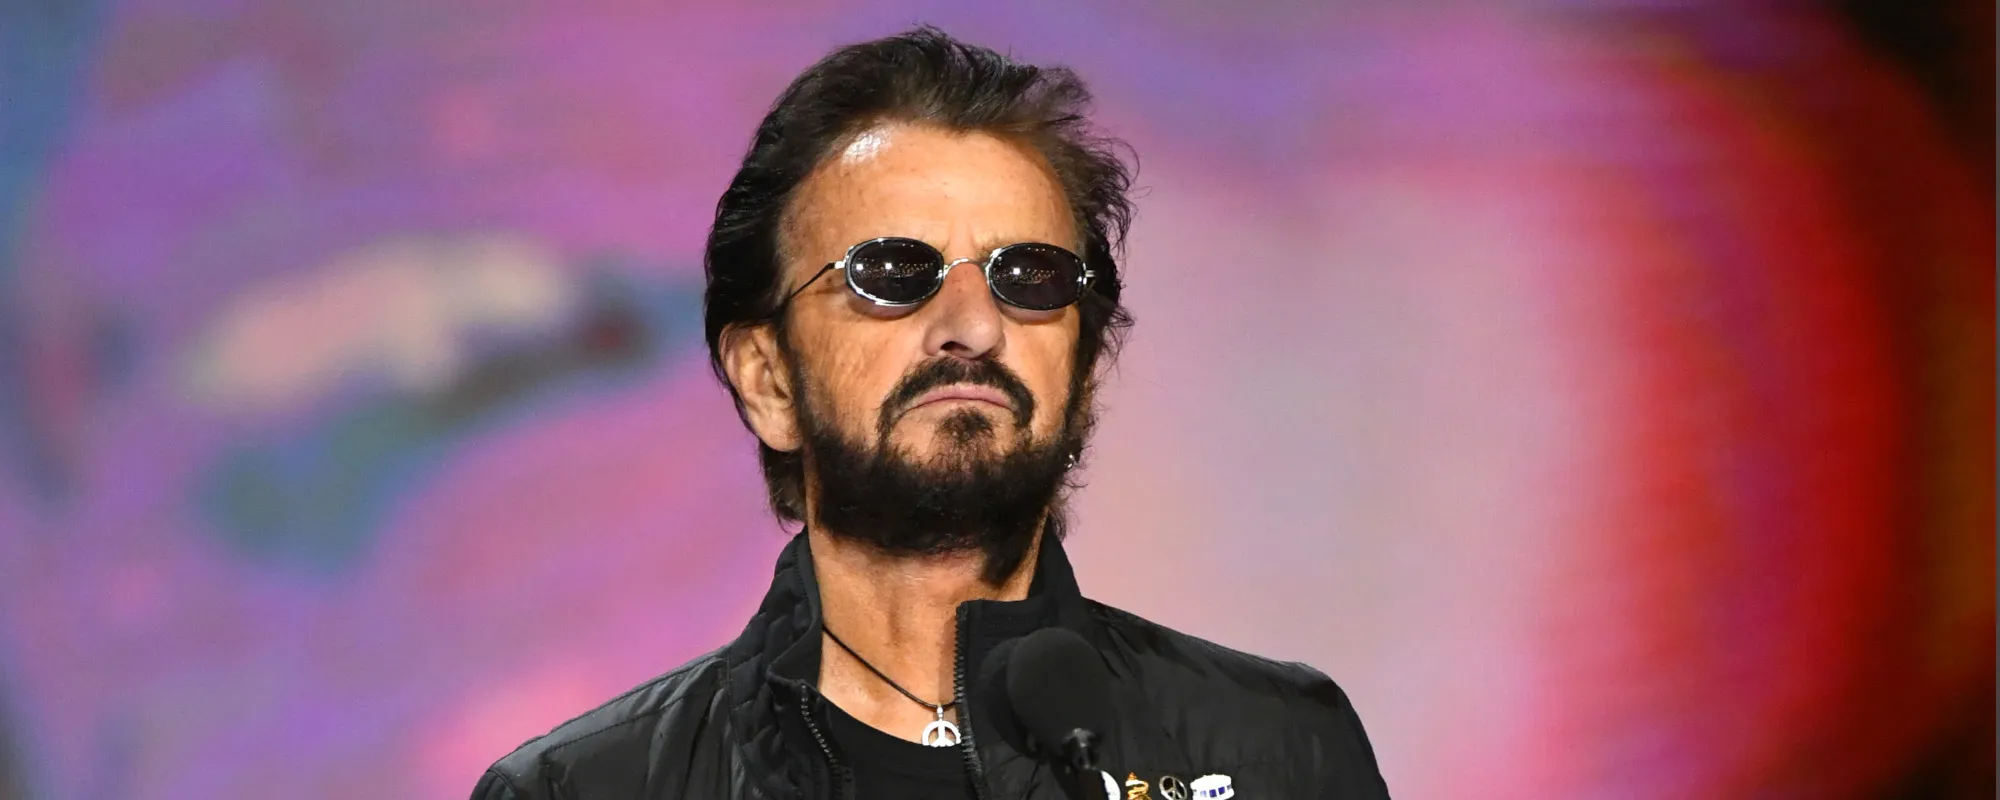 Ringo Starr and His All Starr Band Regroup for Spring 2023 Tour